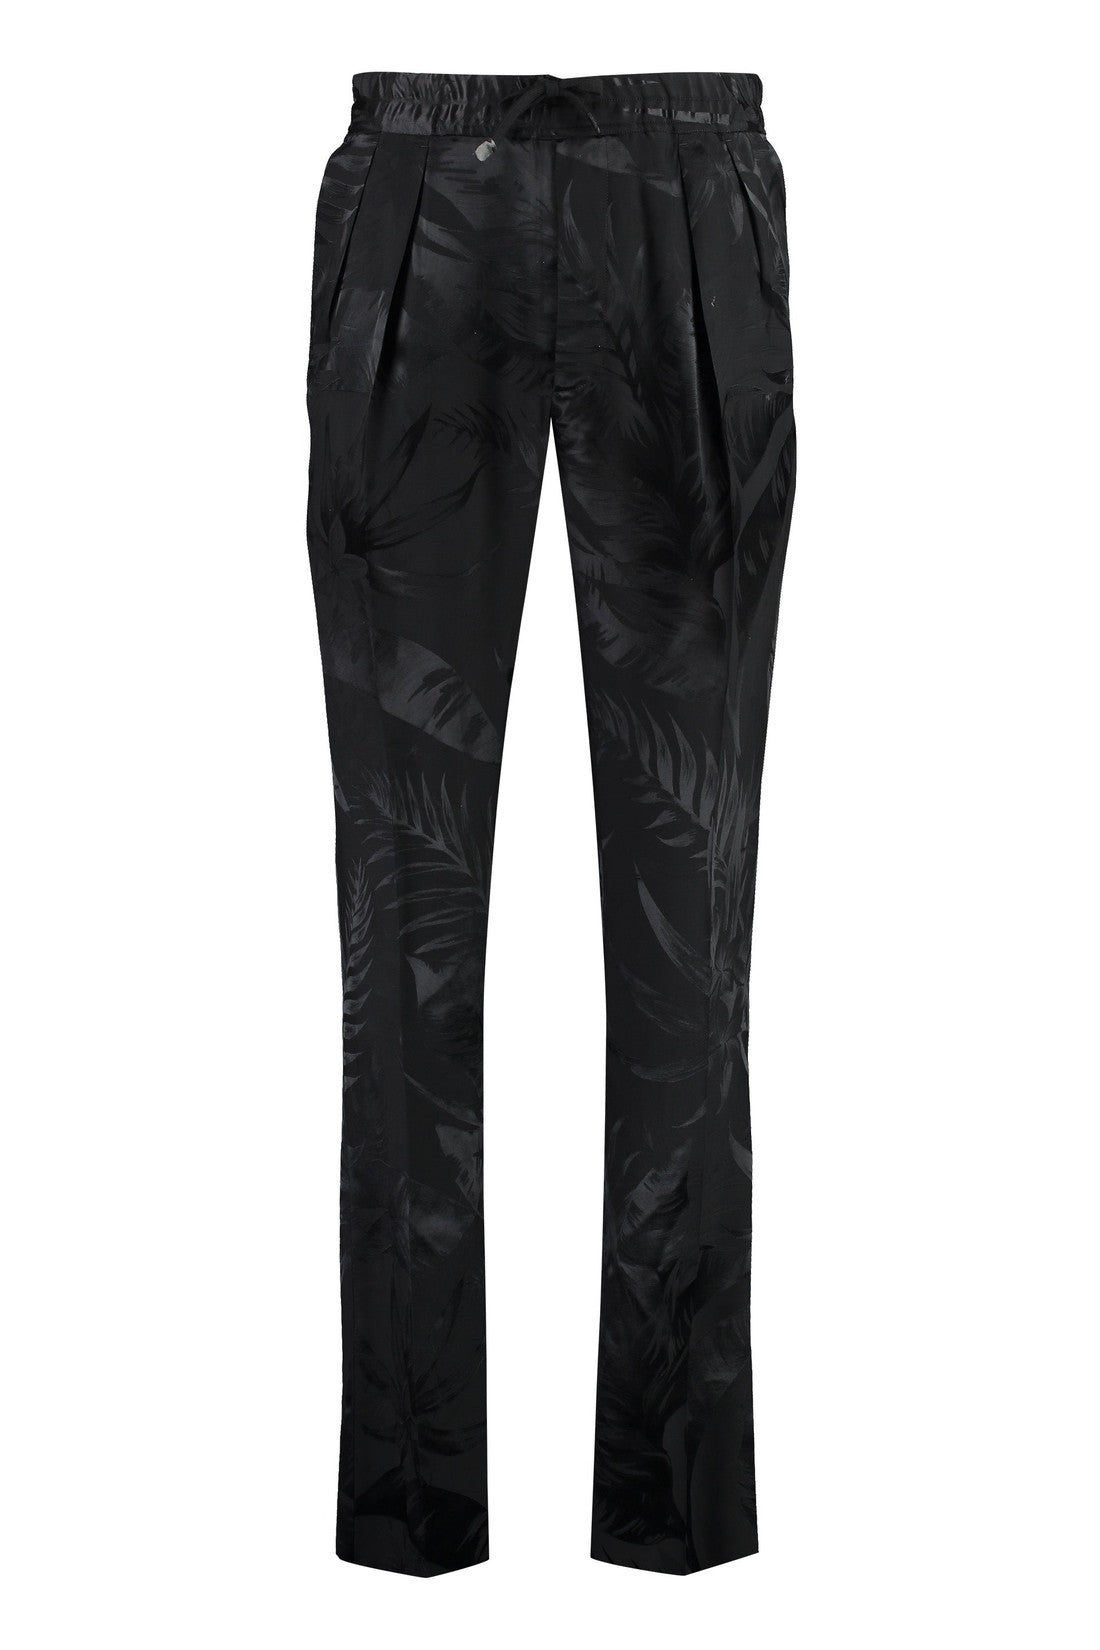 Tom Ford-OUTLET-SALE-Viscose trousers-ARCHIVIST